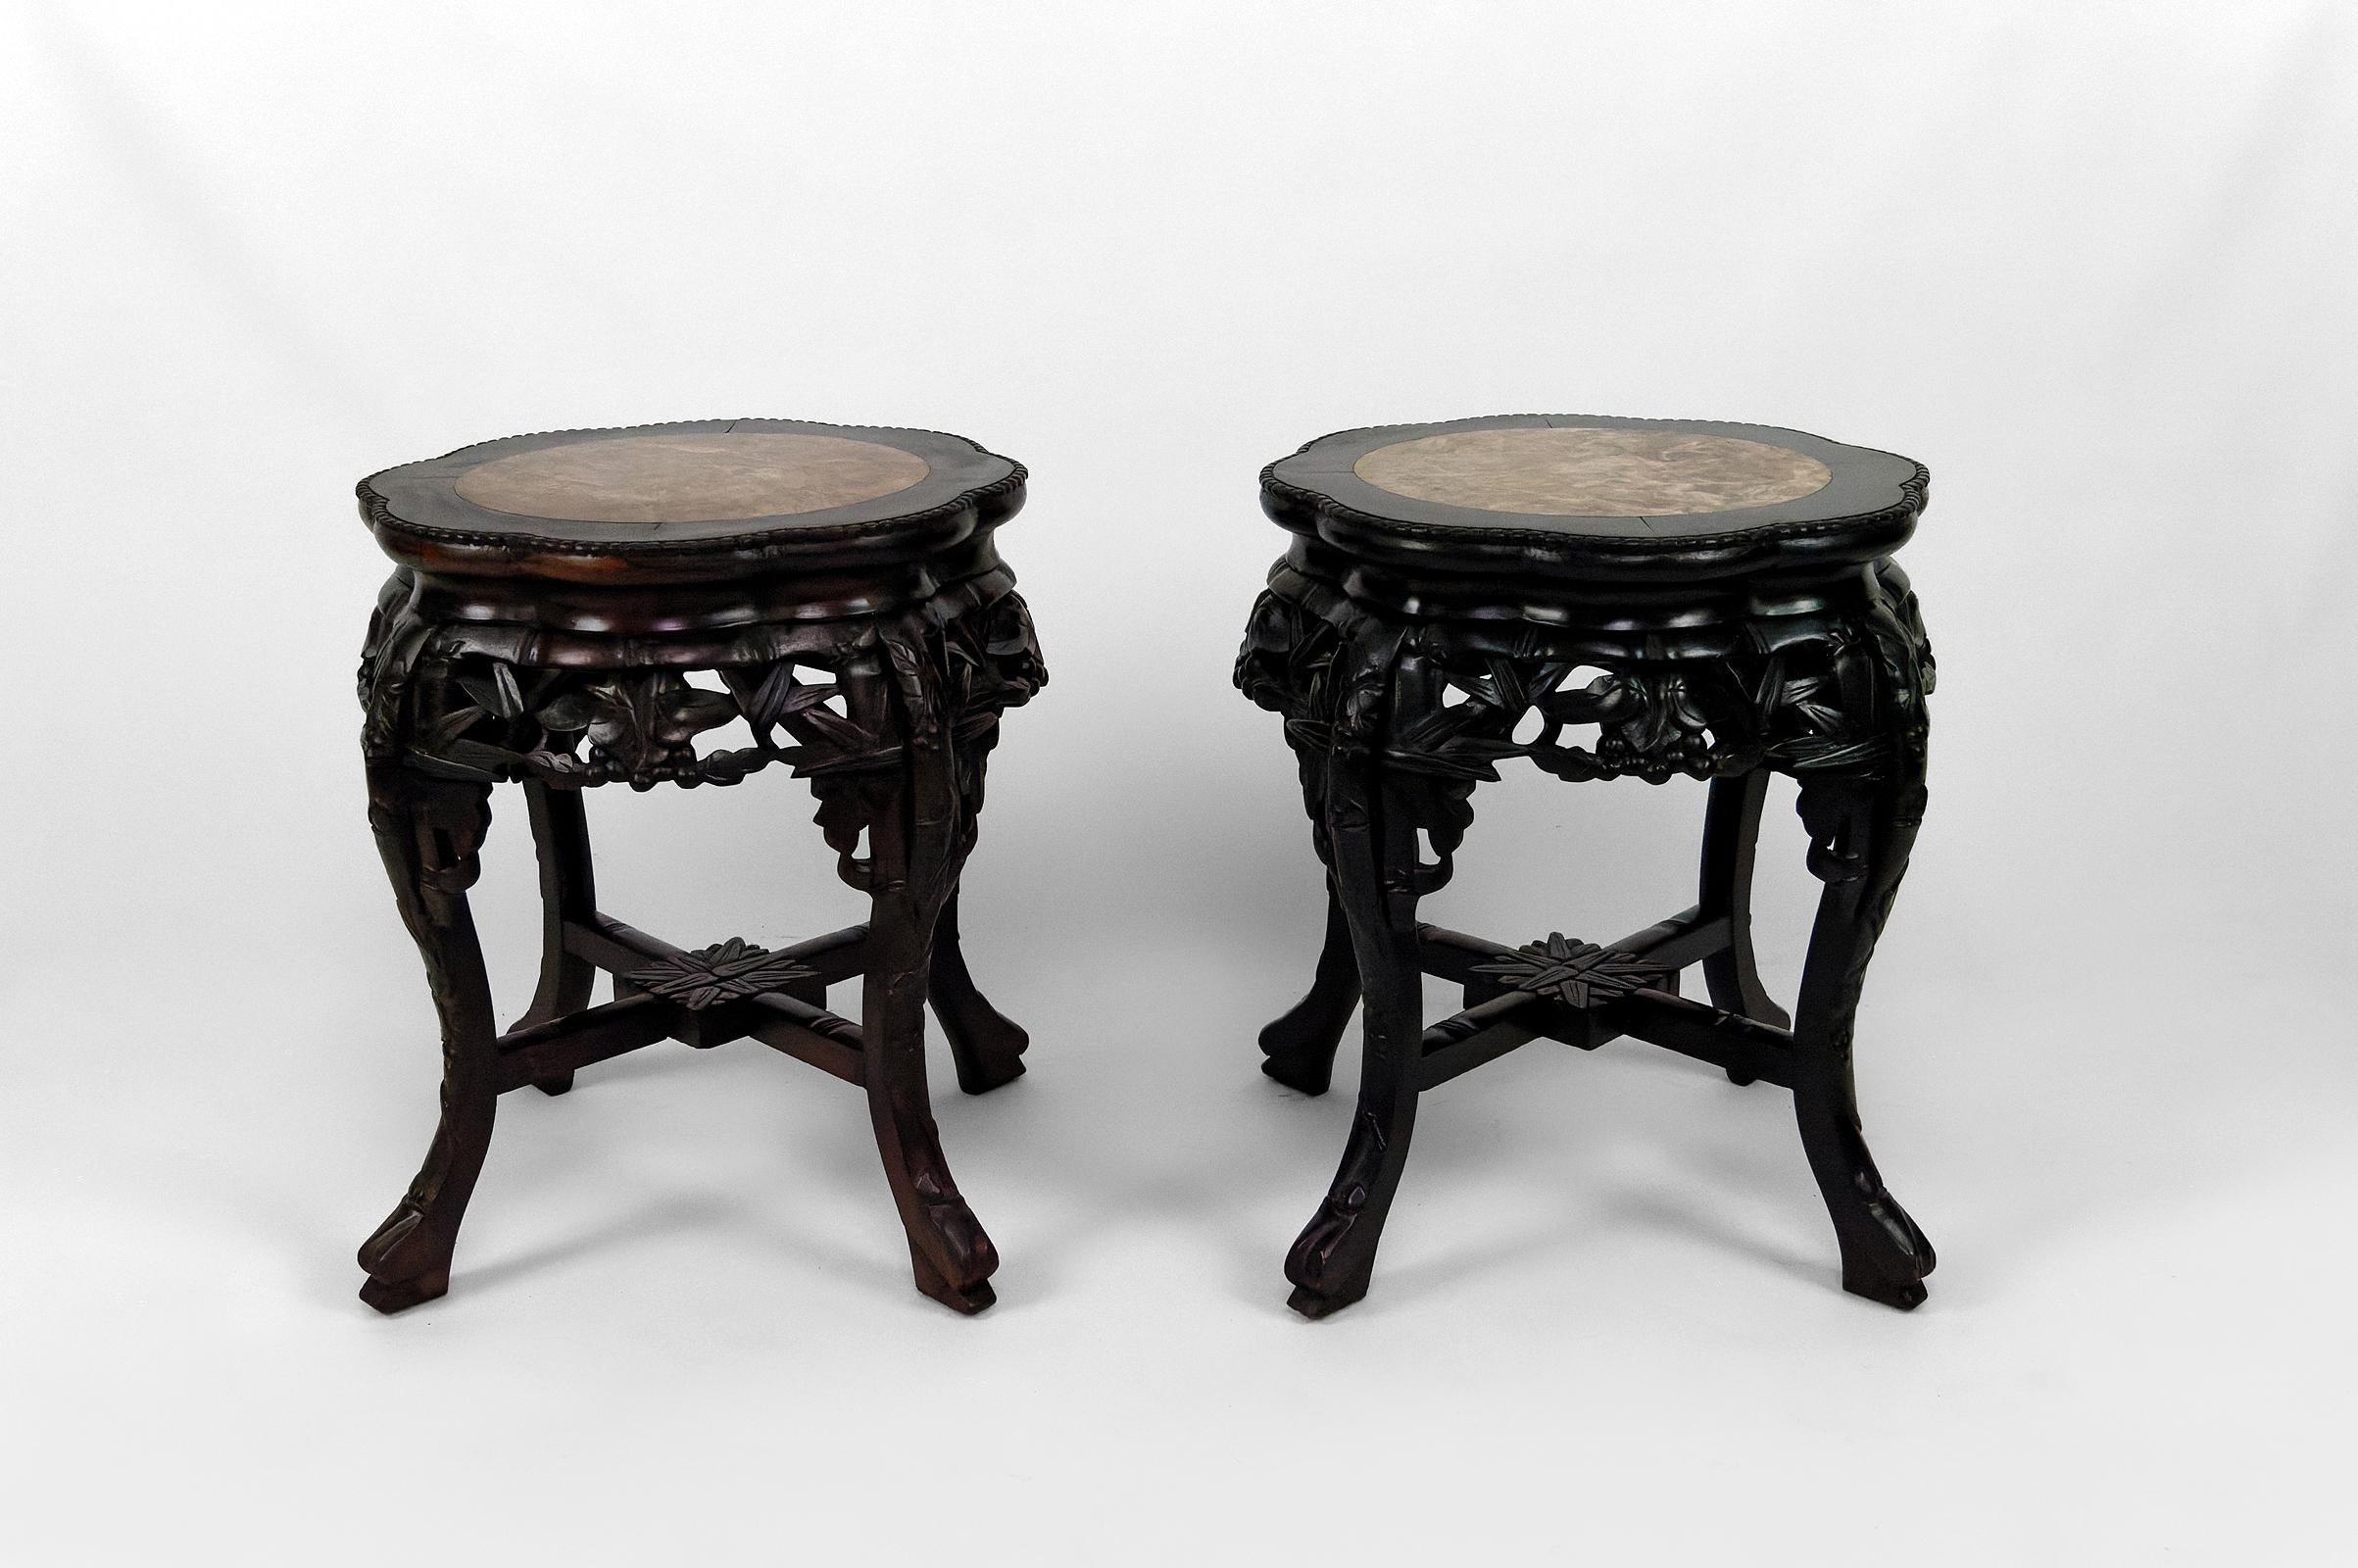 Superb pair of side tables / stools / pedestal tables/ plant holders / pot holders in carved solid wood.

The sculptures represent floral motifs and berries.
The top is in marble, borders decorated with sculpted pearls.

Asia, South China or former